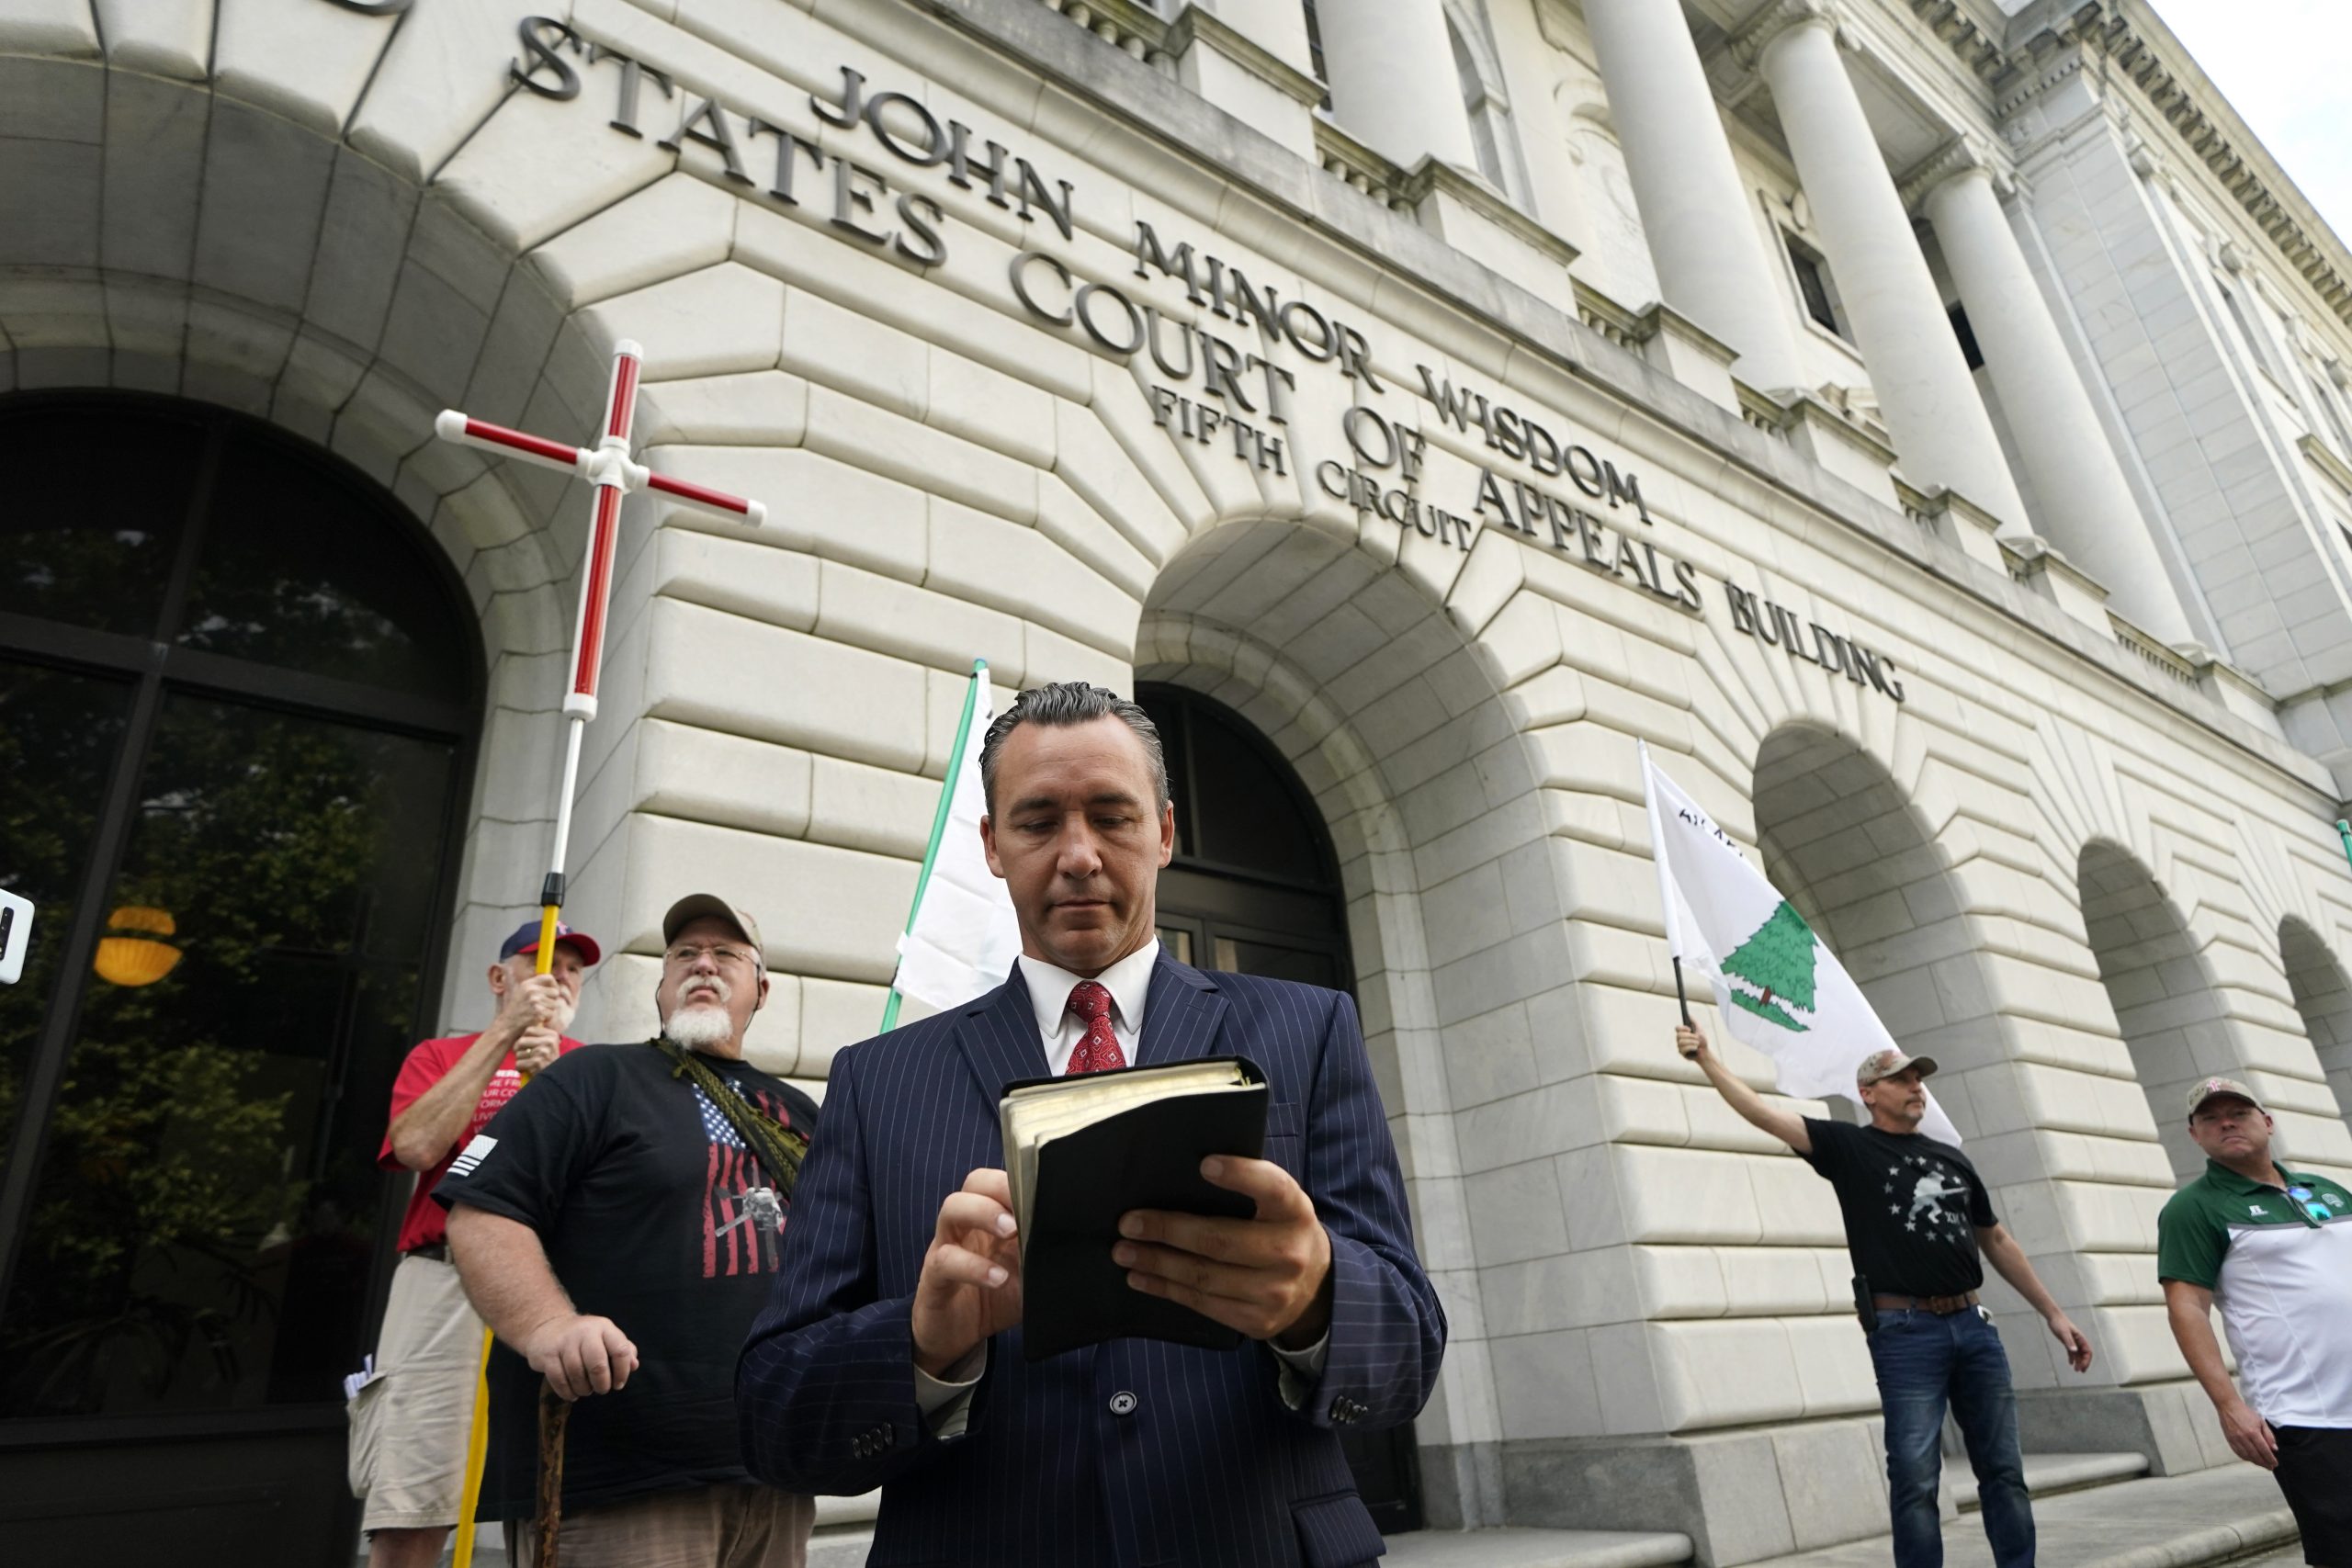 Tony Spell, pastor of the Life Tabernacle Church of Central City, Louisiana, waits outside the 5th Circuit Court of Appeals in New Orleans on June 7, 2021. Spell, who flouted coronavirus restrictions last year, prepared Monday to ask the court to revive his lawsuit challenging the restrictions. (AP Photo/Gerald Herbert)